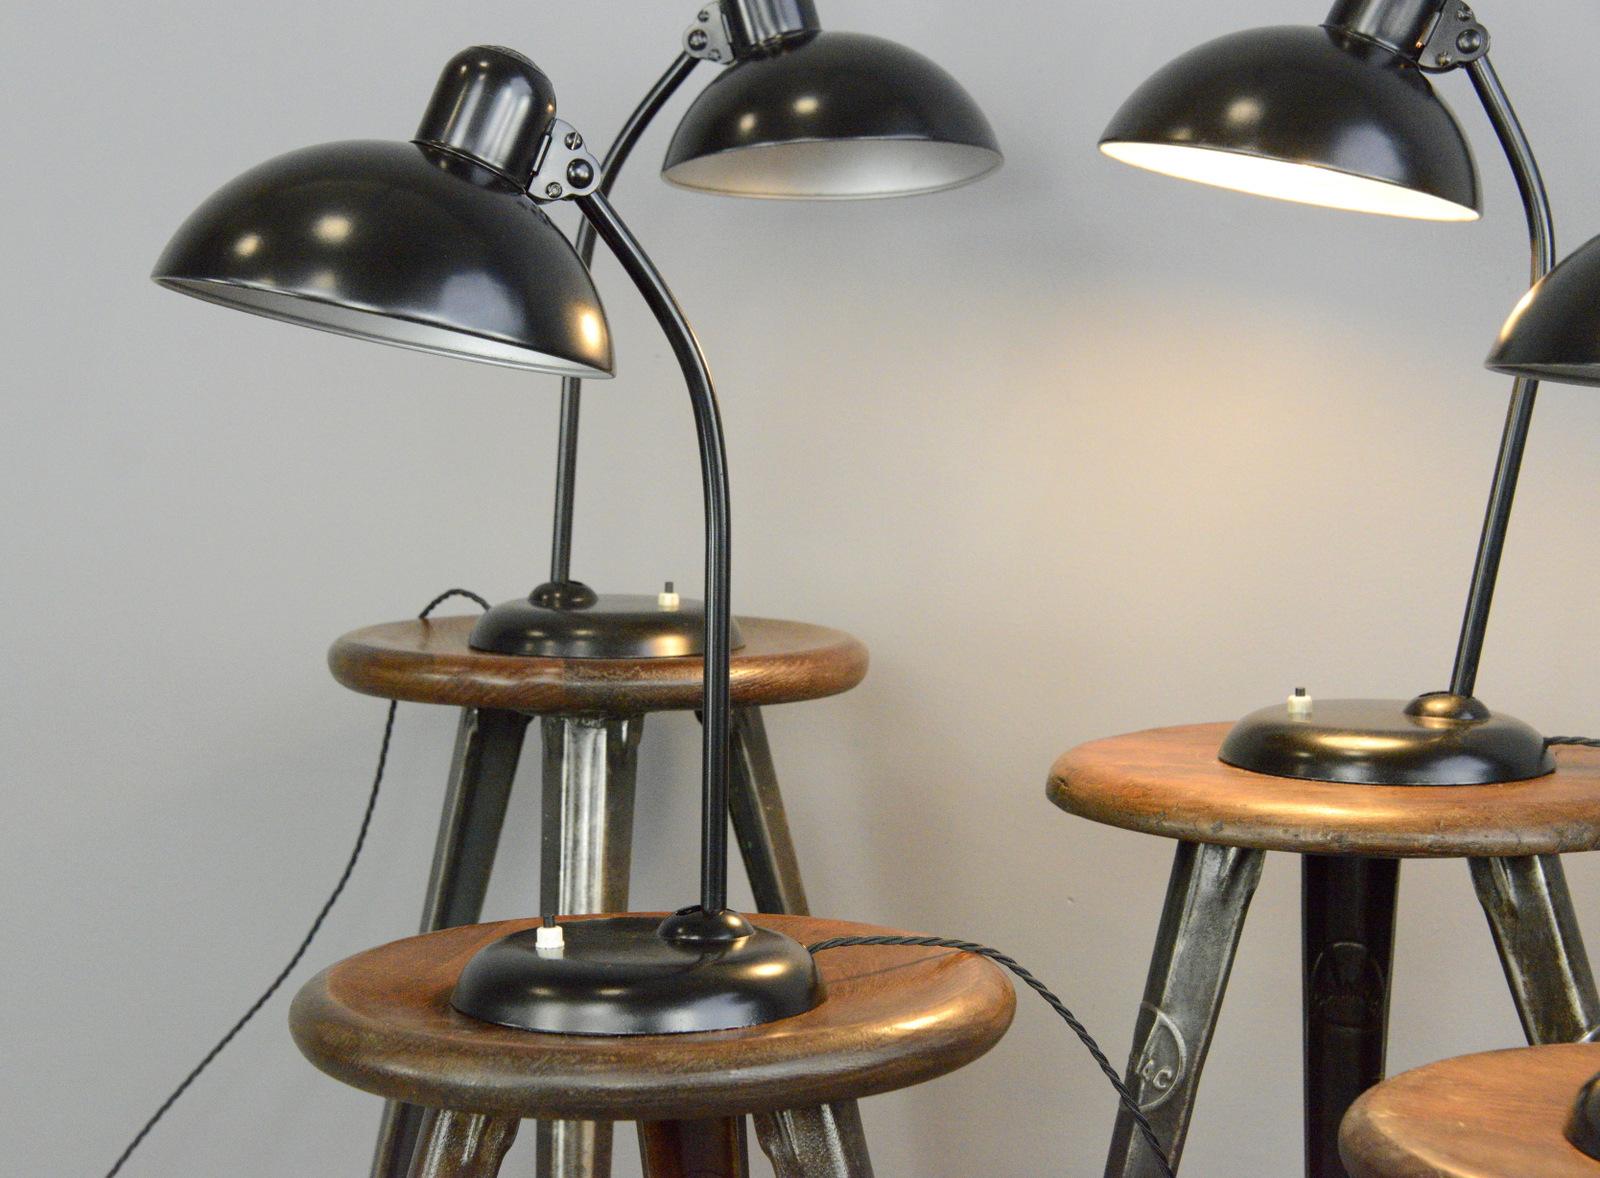 Model 6556 table lamps by Kaiser Idell, circa 1930s

- Price is per lamp (4 available)
- Steel shade with relief Kaiser Idell branding
- On/Off switch on the base
- Takes E27 fitting bulbs
- Adjustable arm and shade
- Designed by Christian